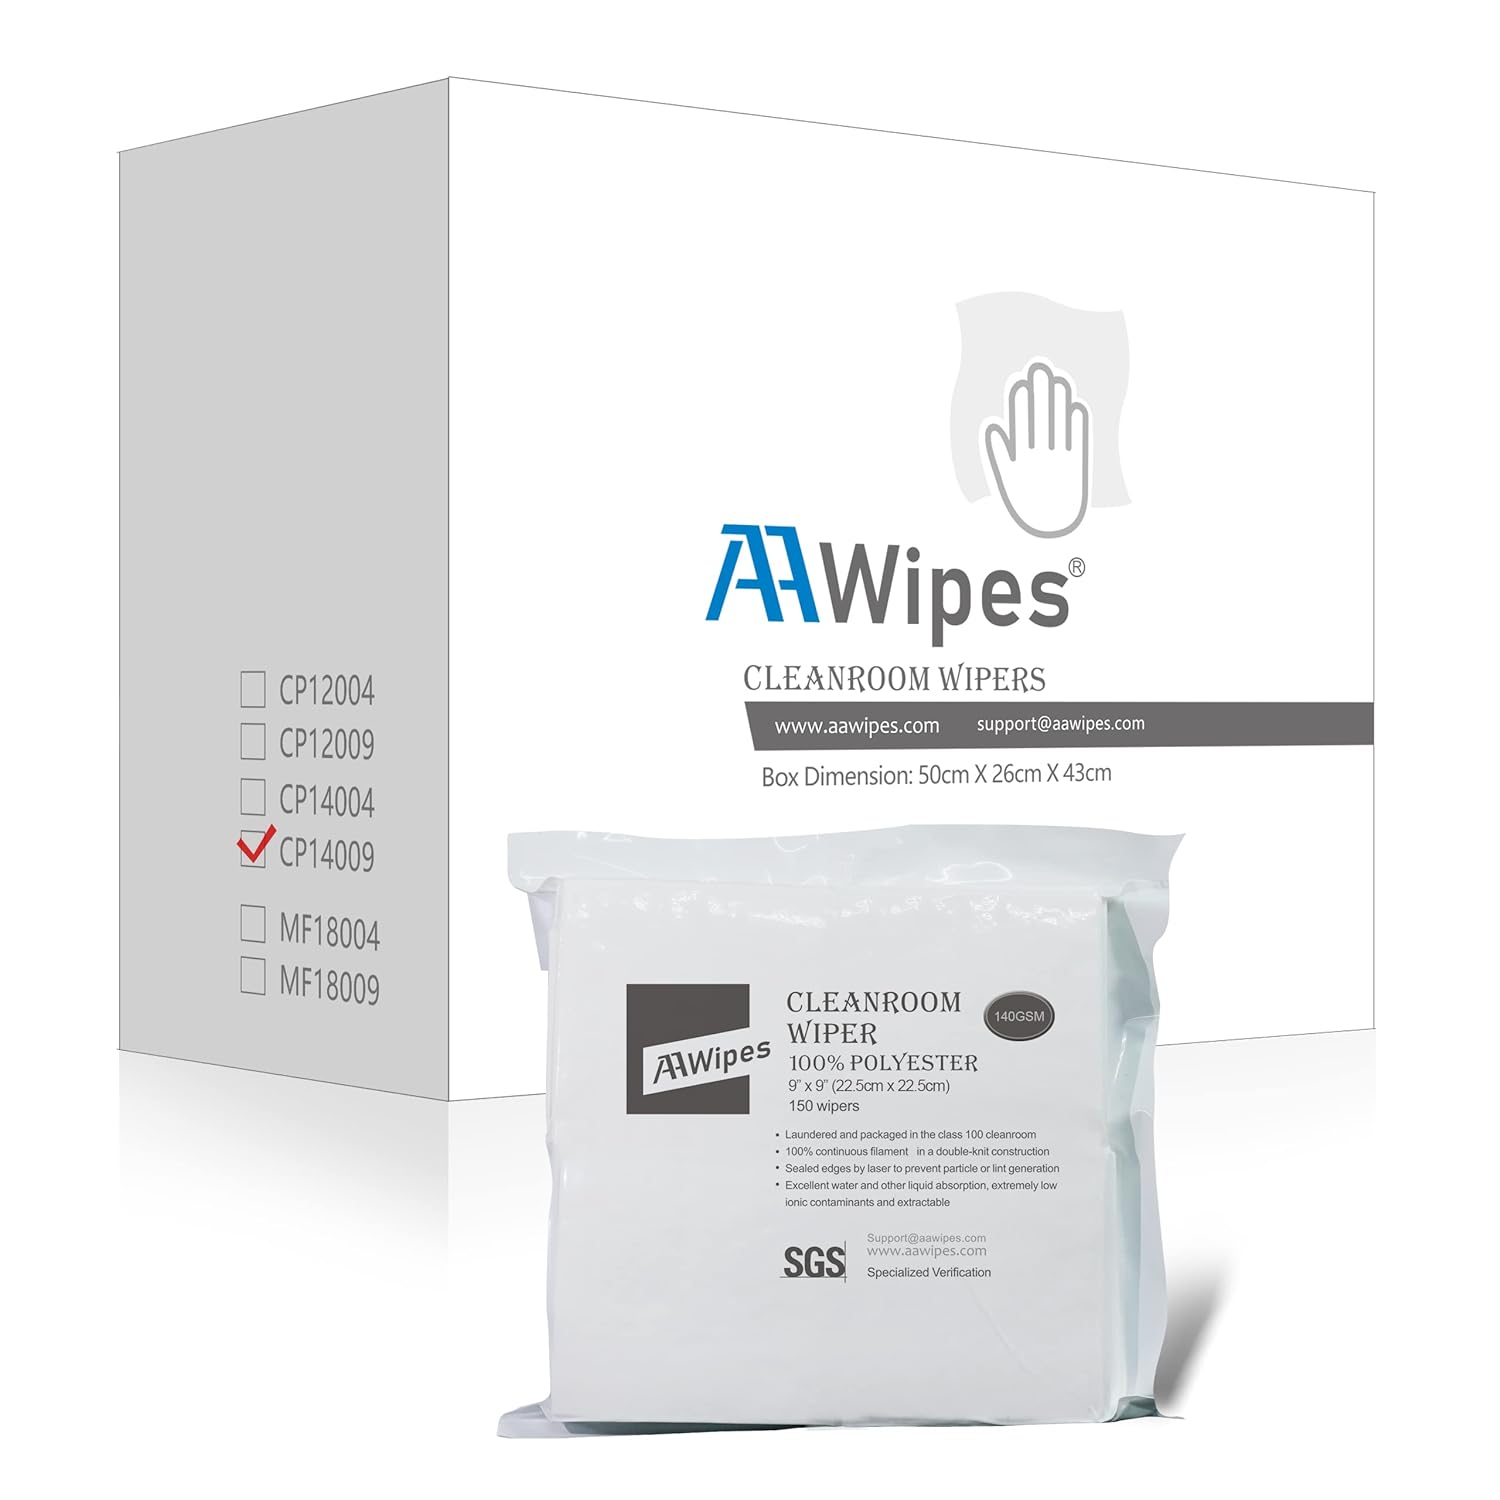 Awipes high-strength polyester microfiber cleanroom cloths are laser-cut and ultrasonically sealed on the edges. They are produced in a class 10-100 cleanroom, laundered in ultra-pure water, and designed to be extremely soft, non-abrasive, fast-drying, with a high-density weave 